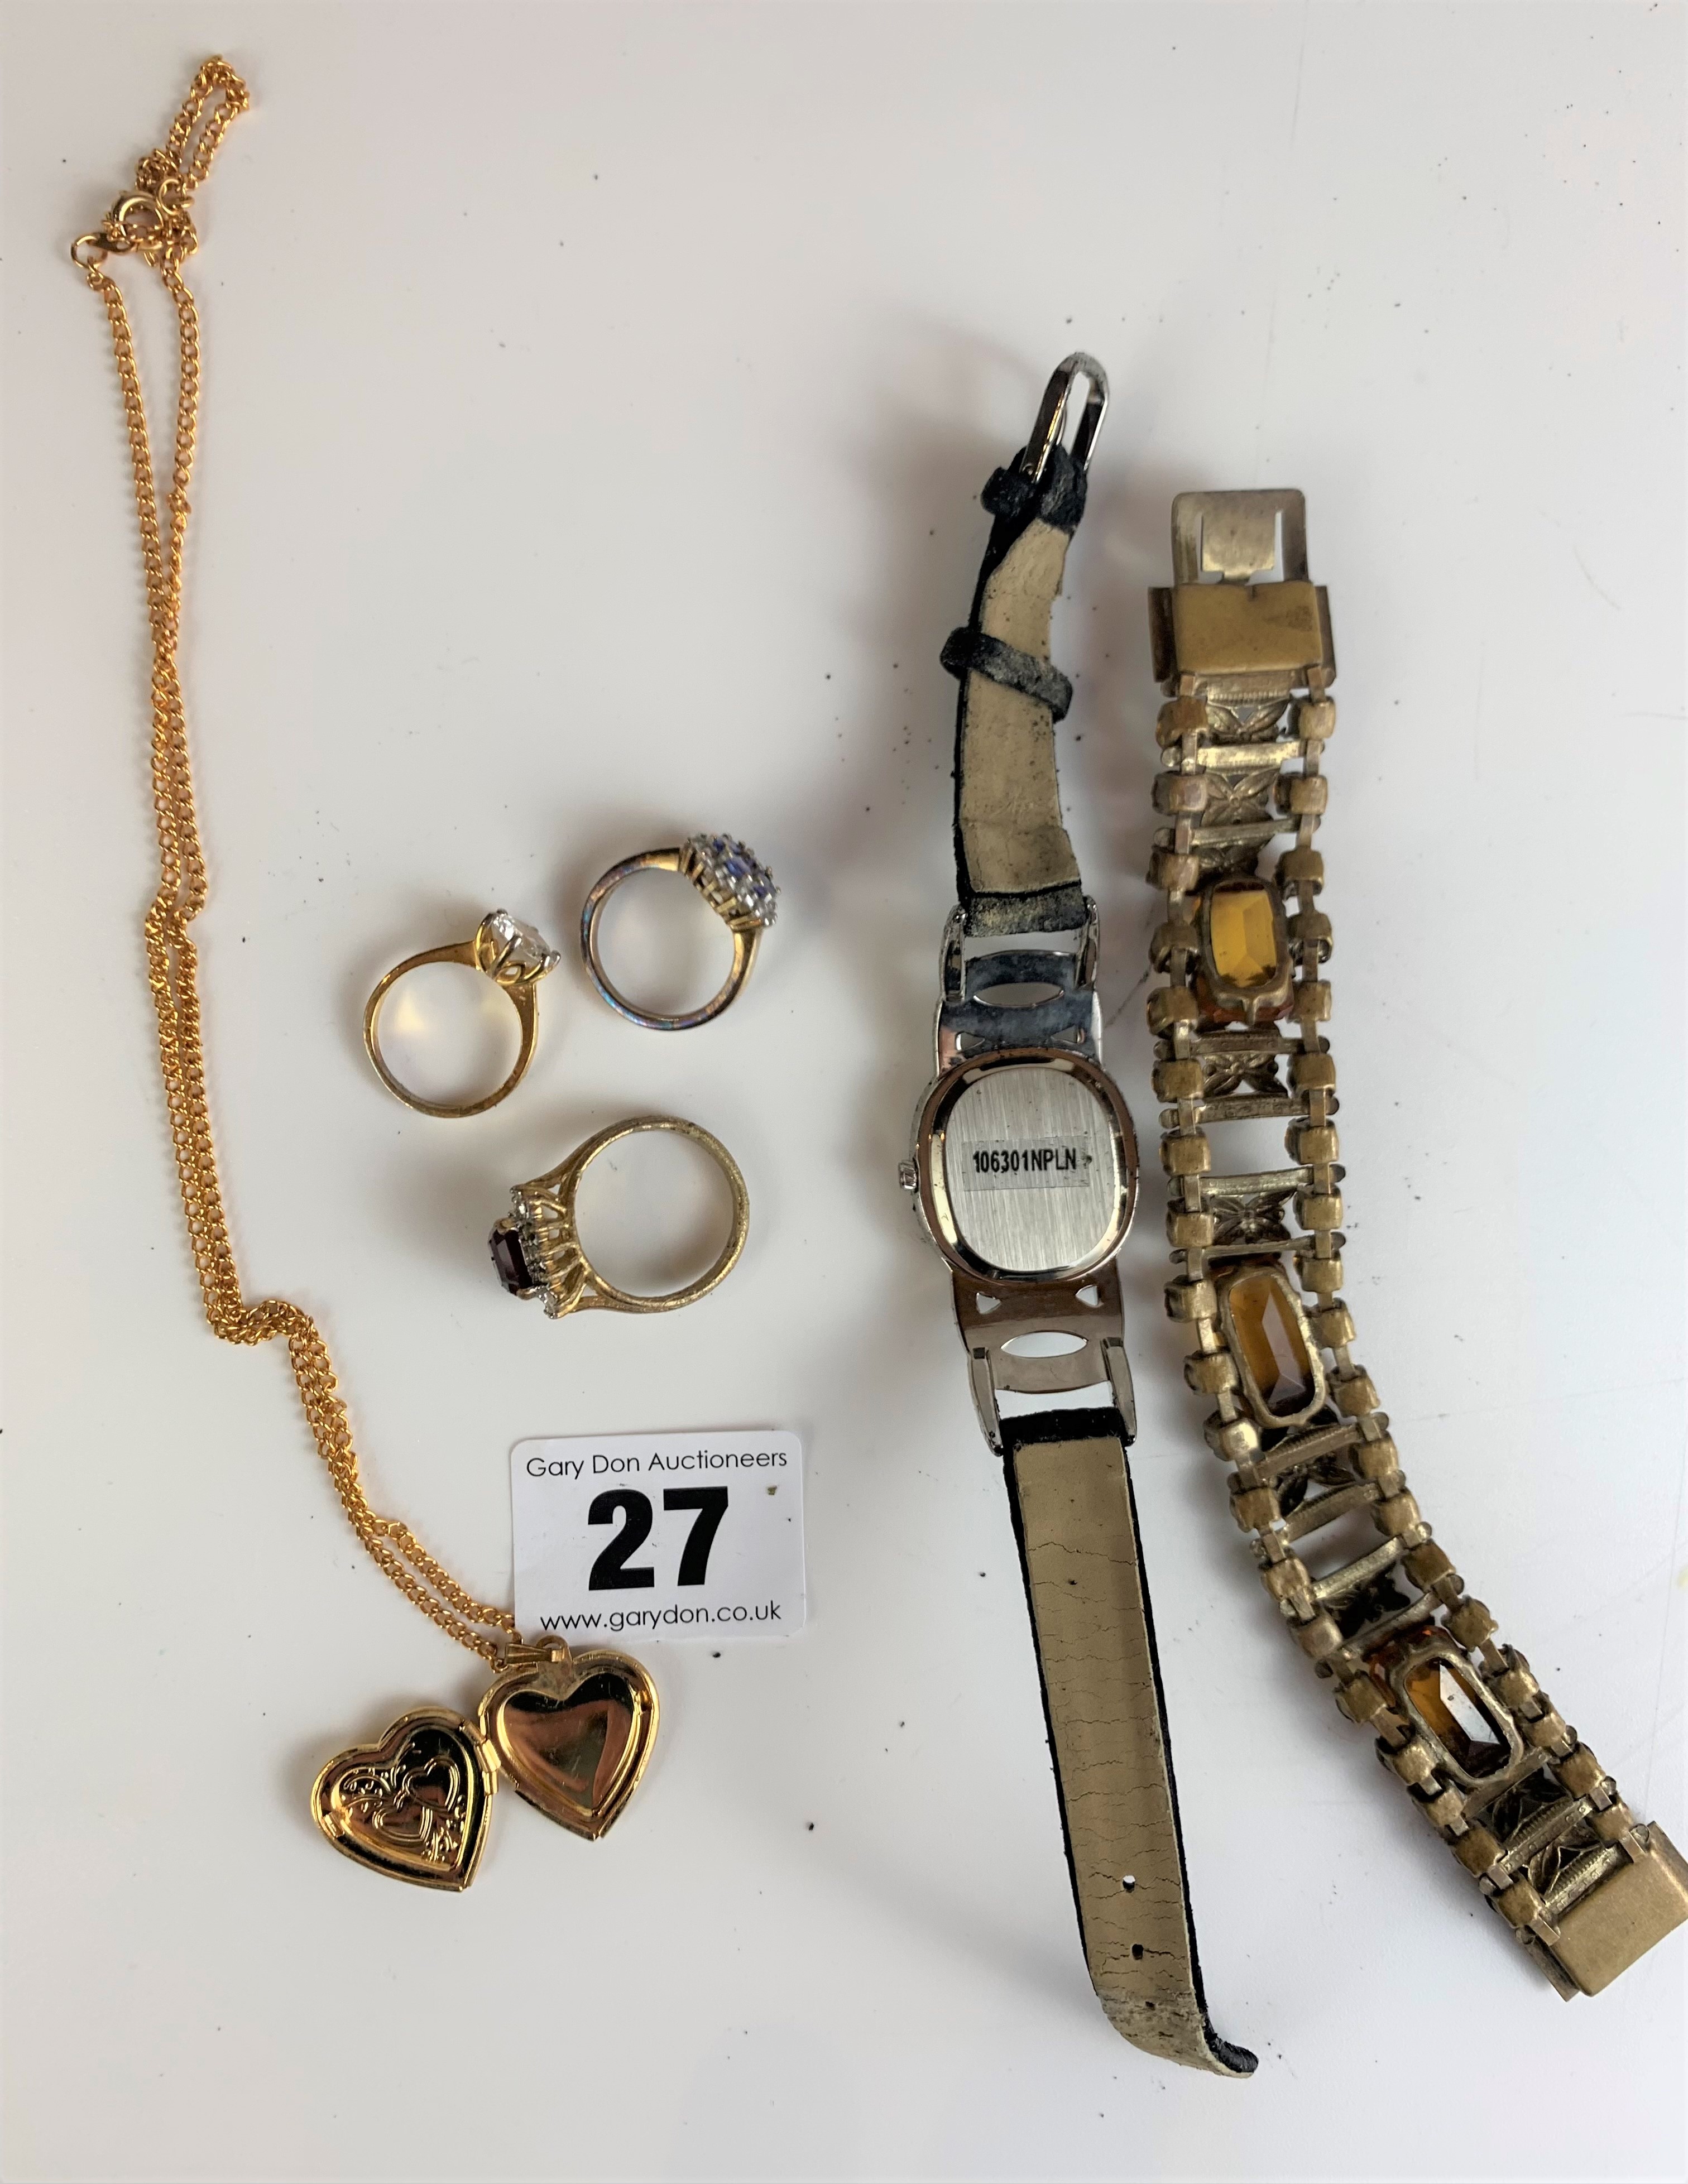 Dress jewellery – watch, bracelet, necklace with locket and 3 rings - Image 5 of 5